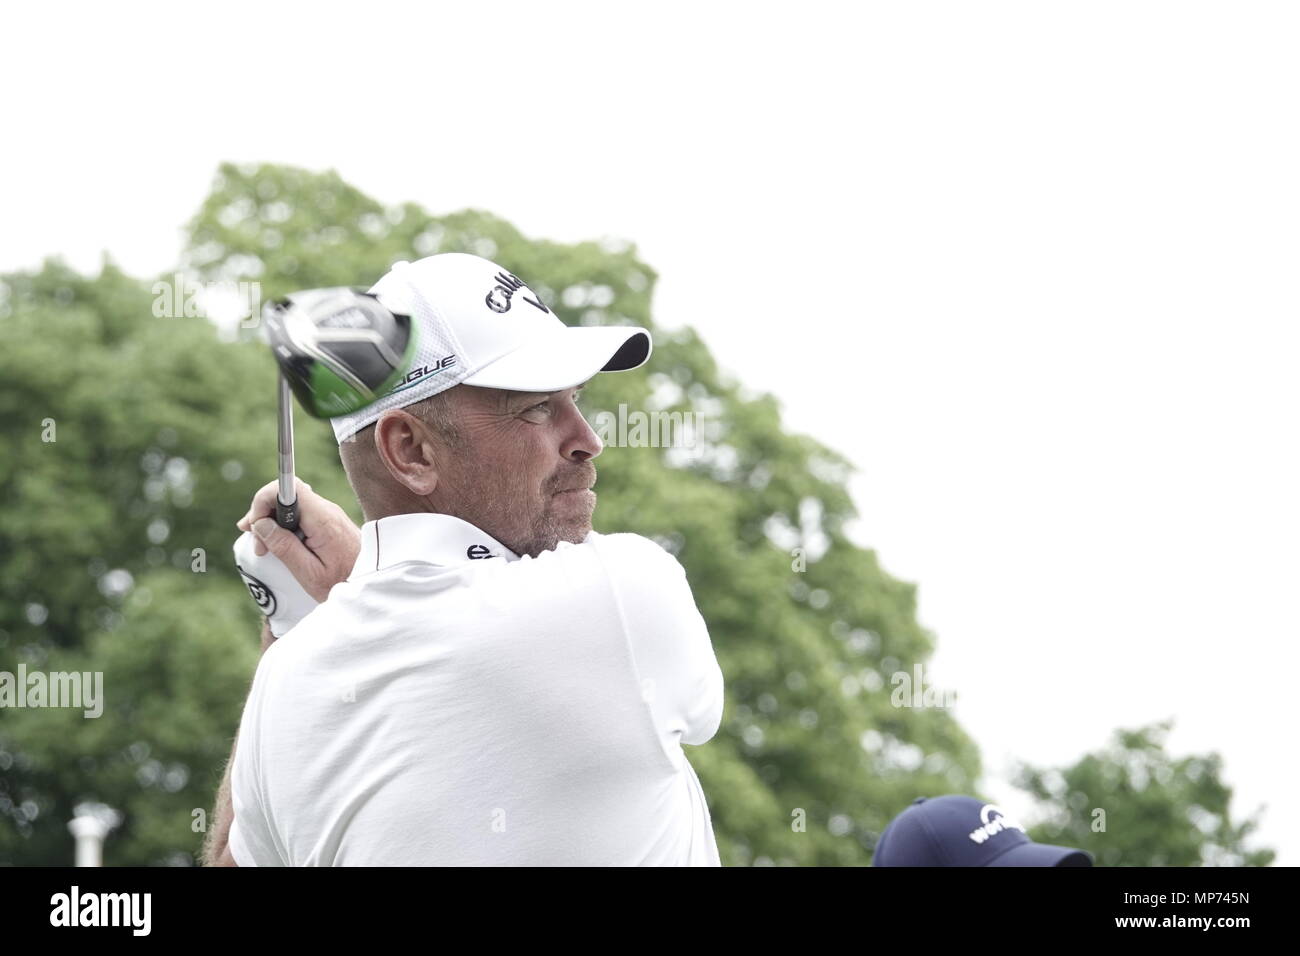 Wentworth Club, Surrey, UK . 21st May, 2018 Thomas Bjorn (Denmark) Ryder Cup Captain of Europe prepares for the start of the annual BMW/PGA CHAMPIONSHIP at The famous Wentworth Club Credit: Motofoto/Alamy Live News Stock Photo